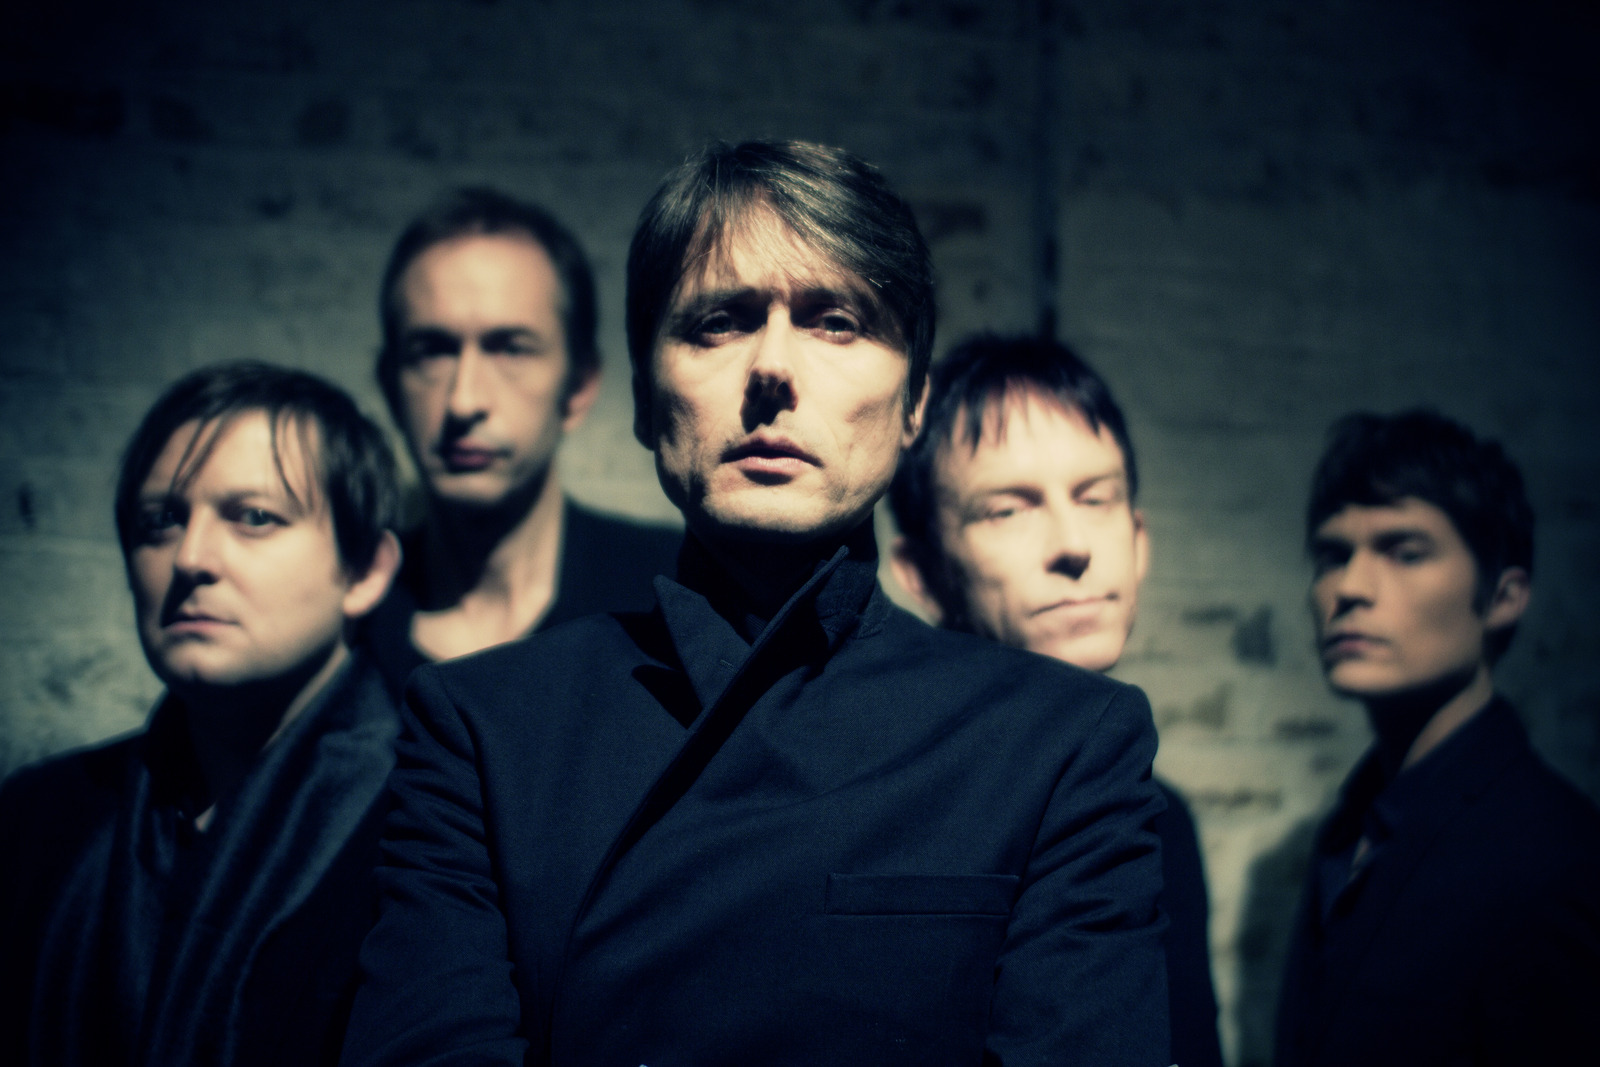 Suede break 10 year silence with 'Barriers' first new track from new LP 'Bloodsports' due in March